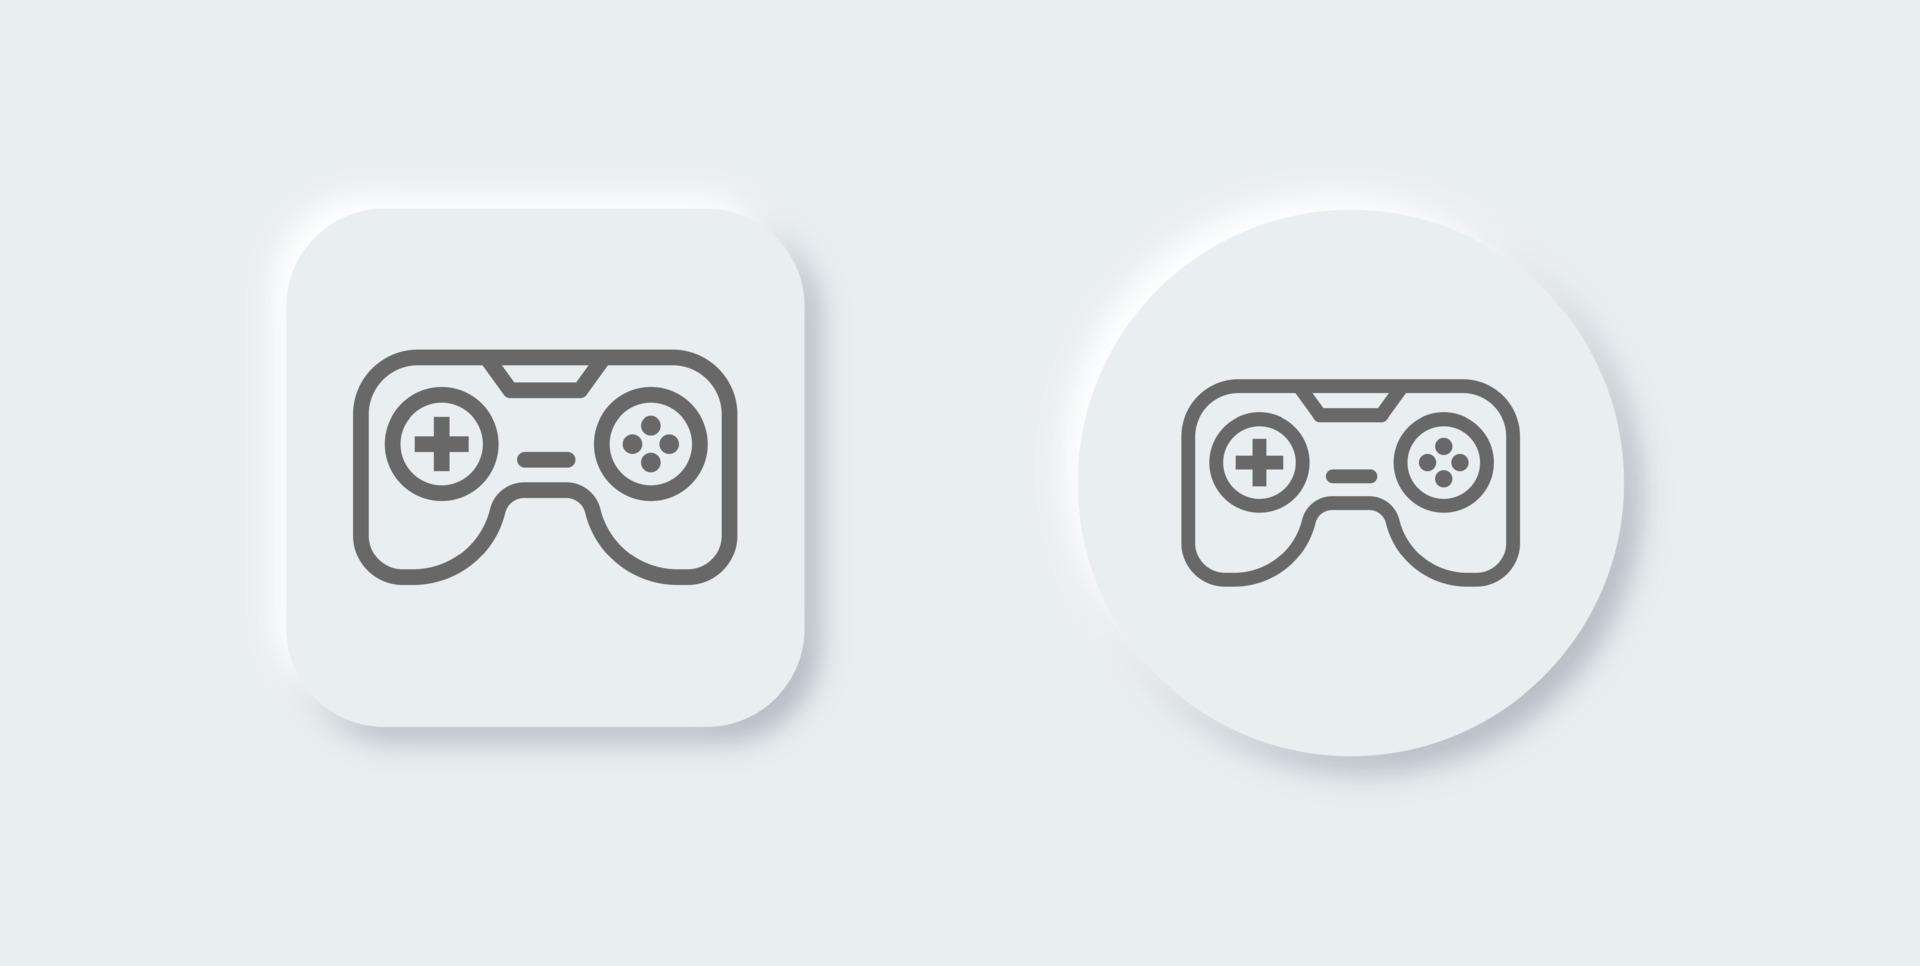 Joystick line icon in neomorphic design style. Game controller signs vector illustration.